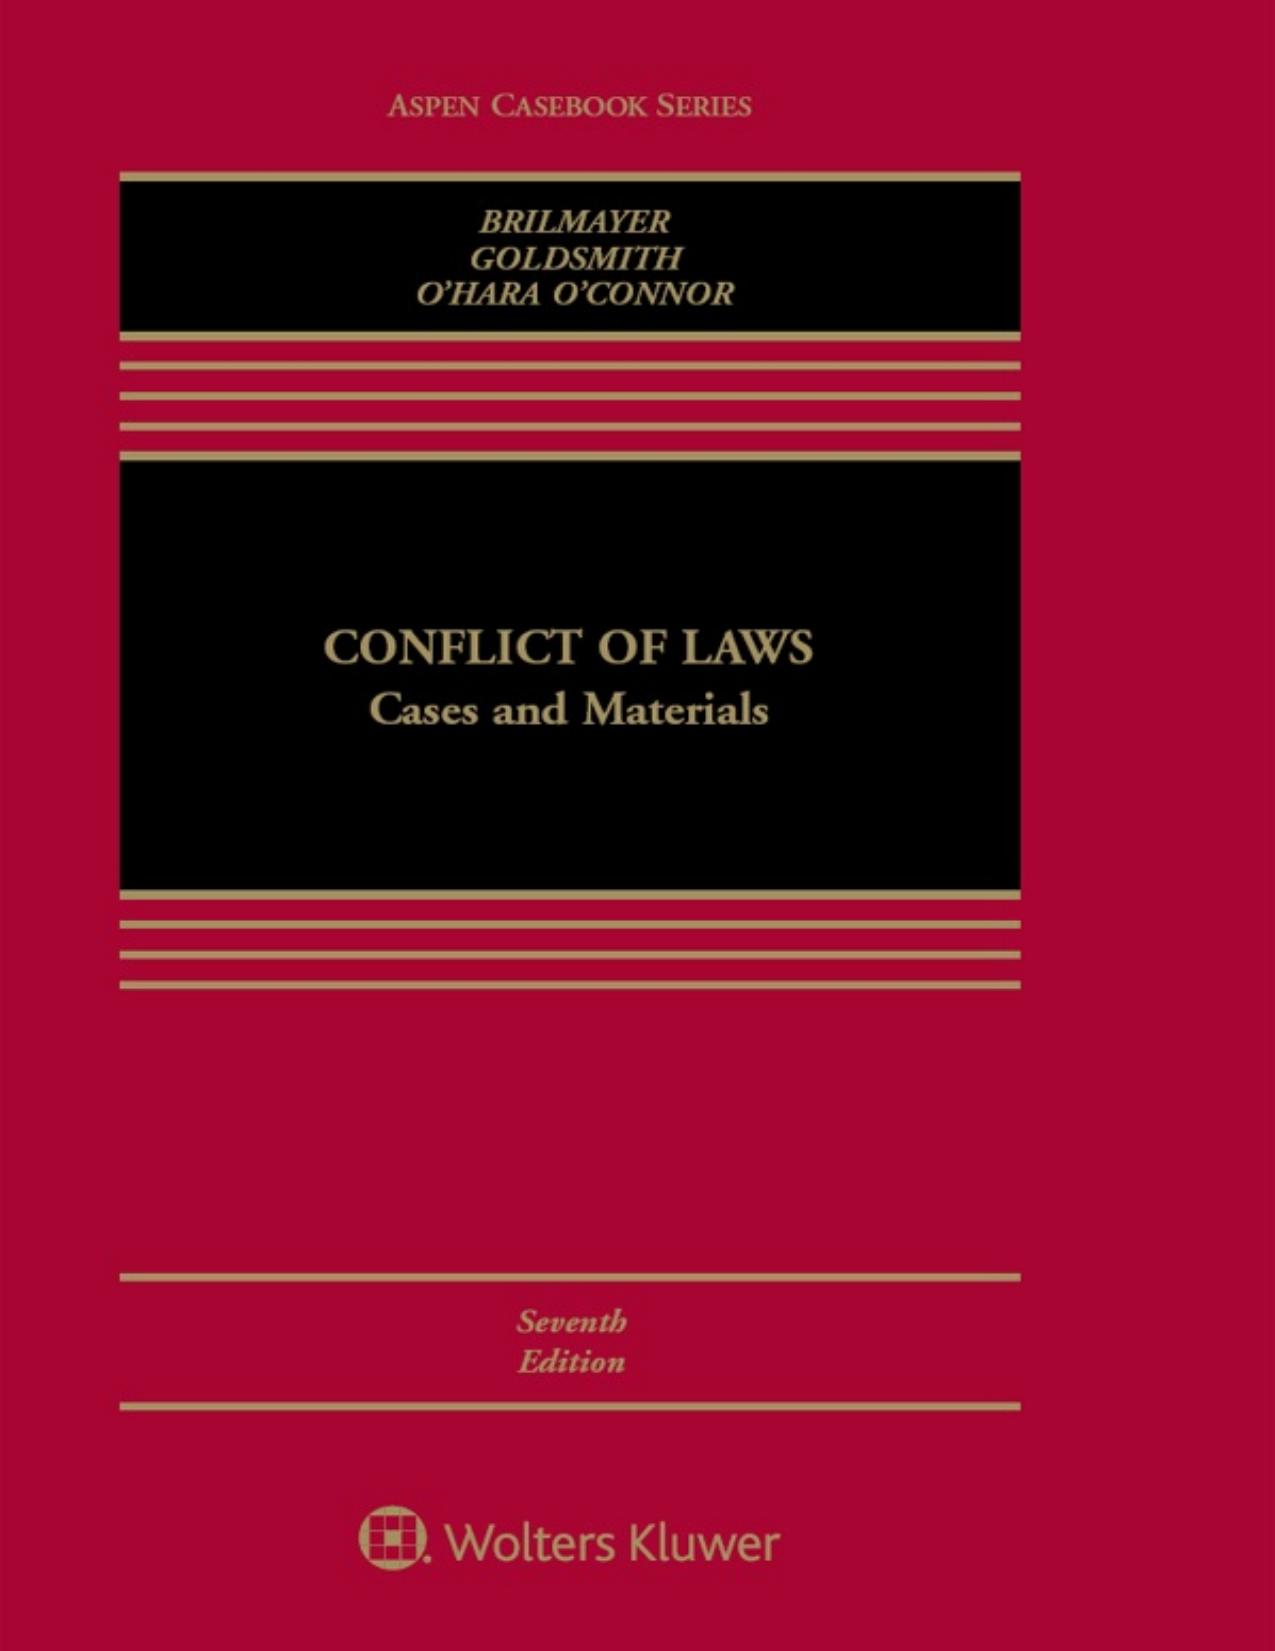 Conflict of laws : cases and materials - PDFDrive.com